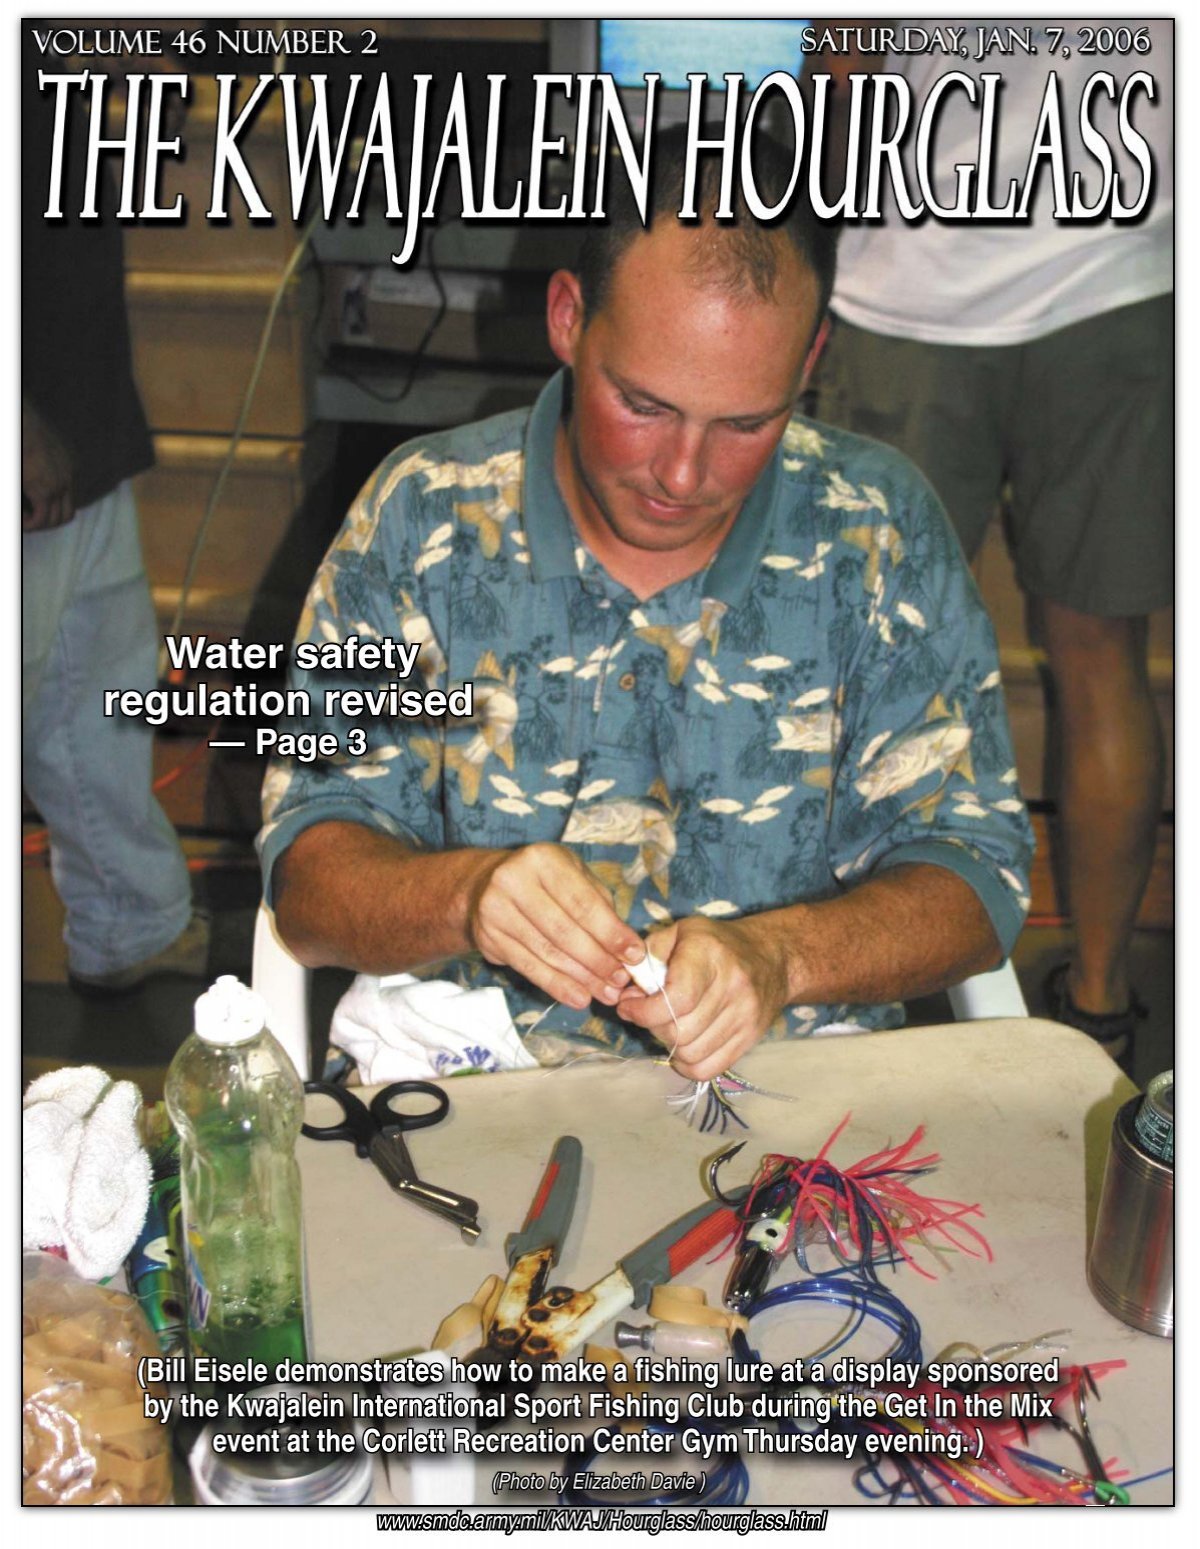 Bill Eisele demonstrates how to make a fishing lure at a display